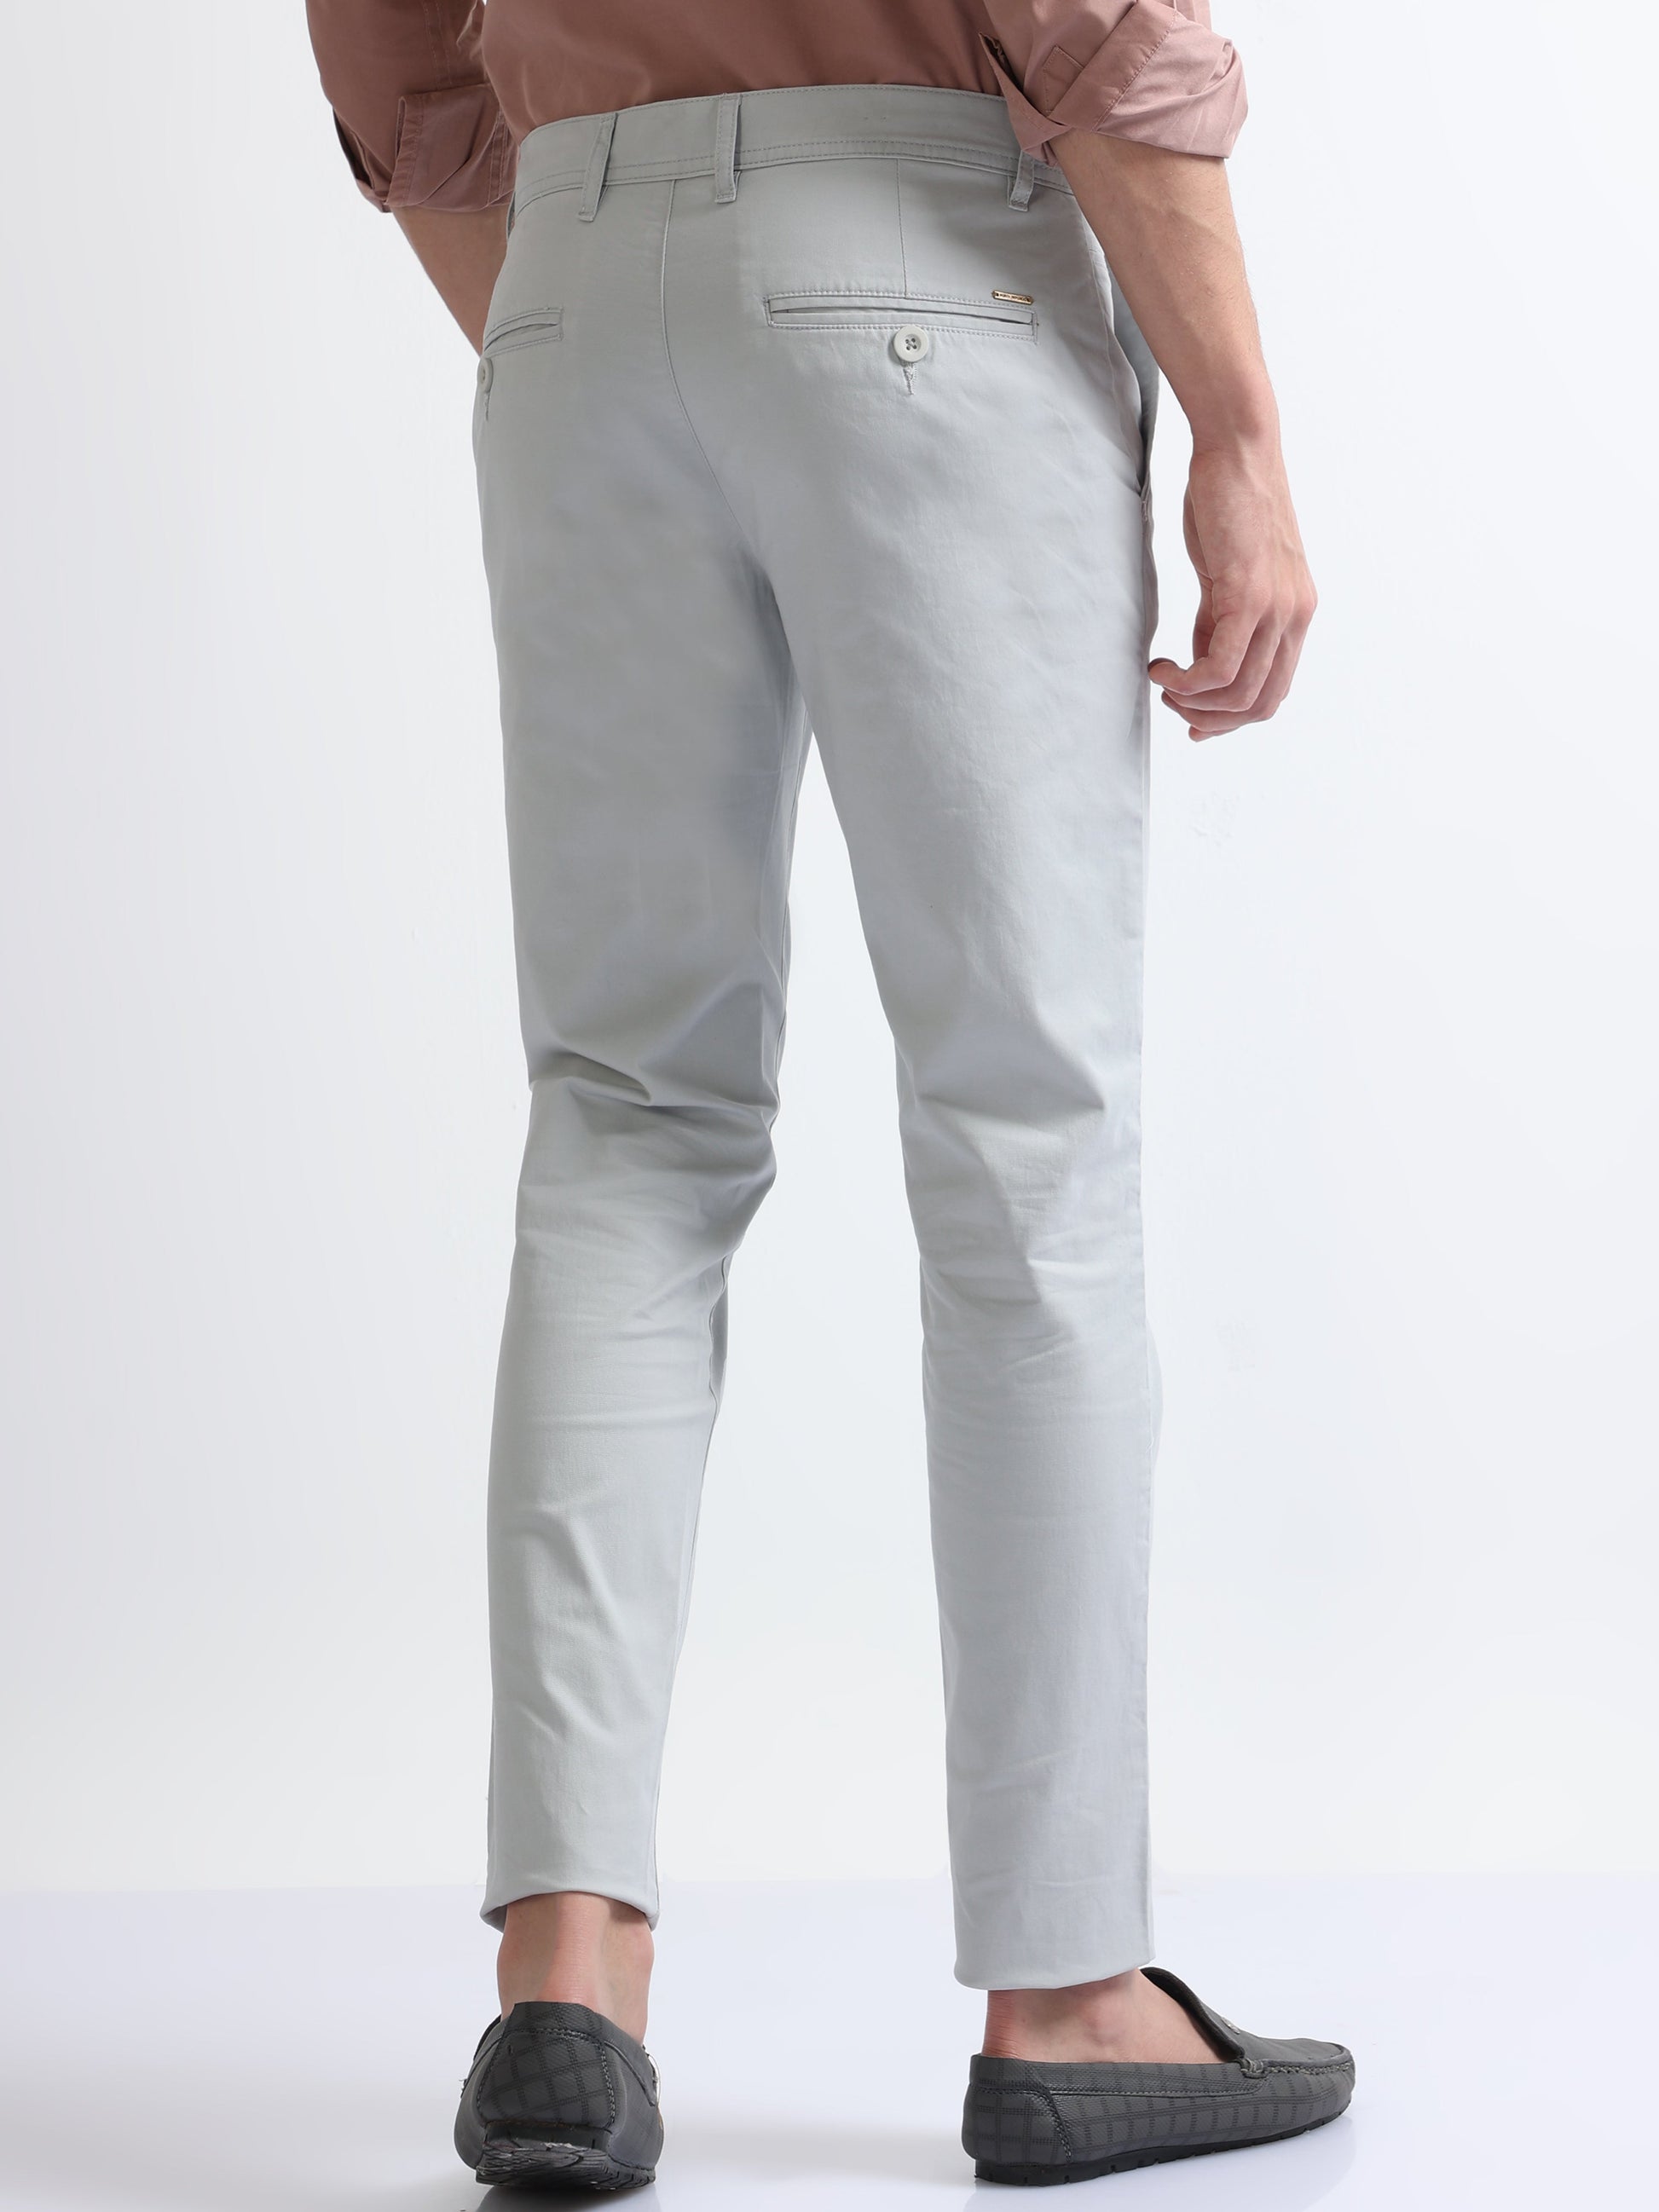 Buy Cotton Twill Stretch Trousers Online.